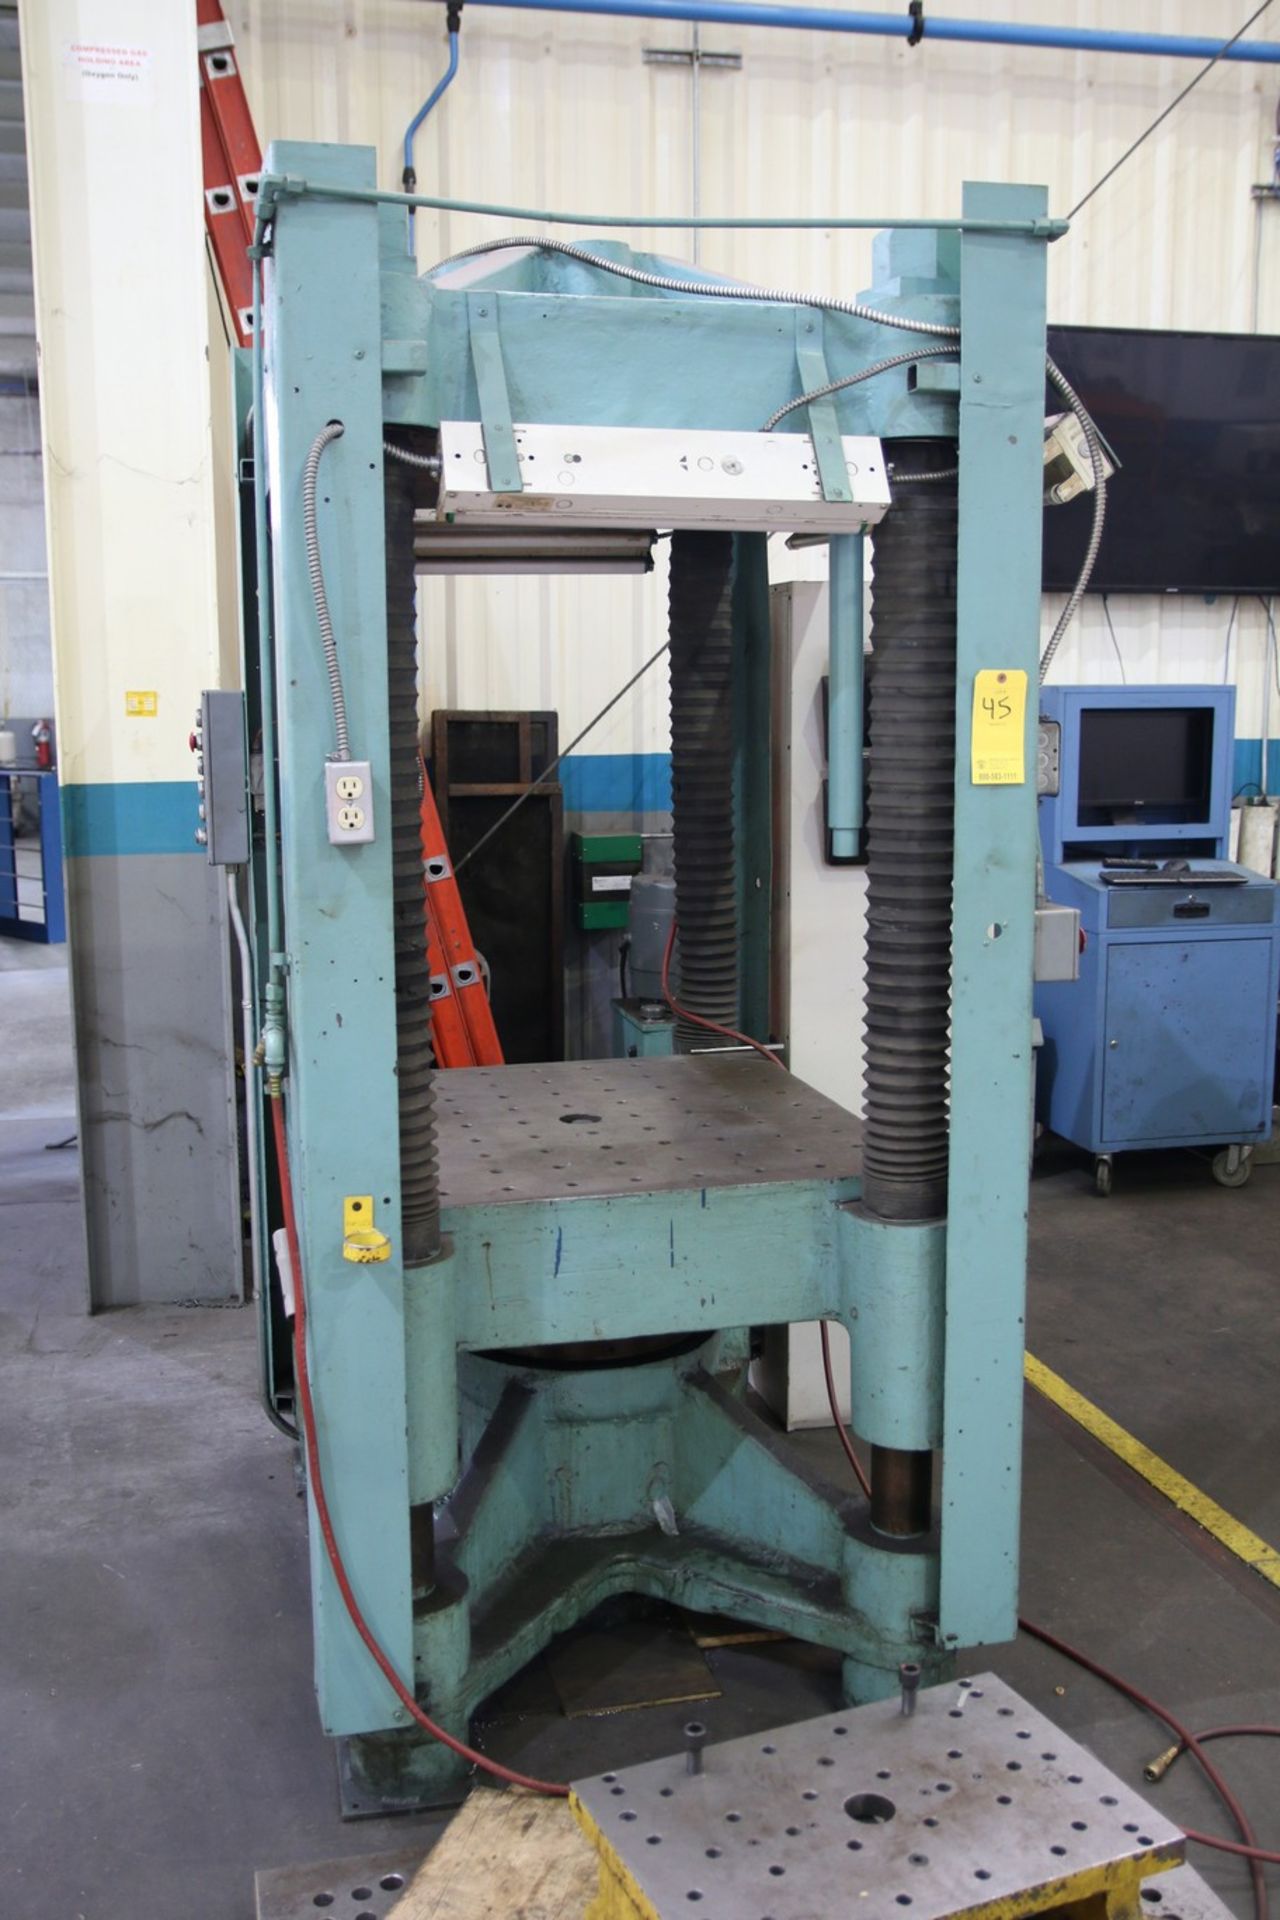 60 Ton 4-Post Hydraulic Spotting Press Includes (1) 15" x 24" and (1) 32" x 48" Setup Table